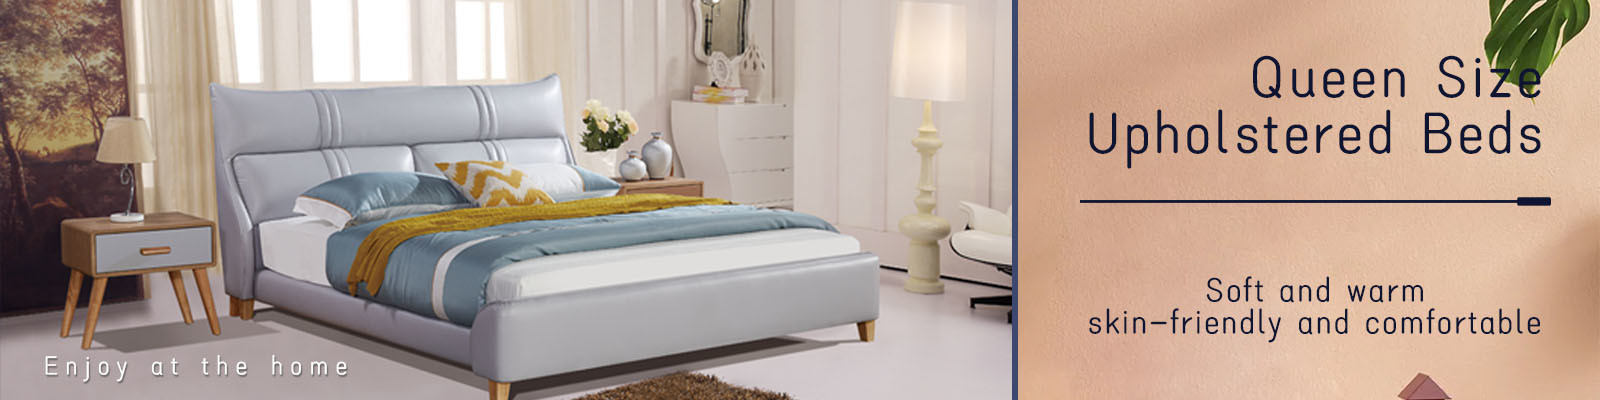 Le Roi Size Upholstered Beds